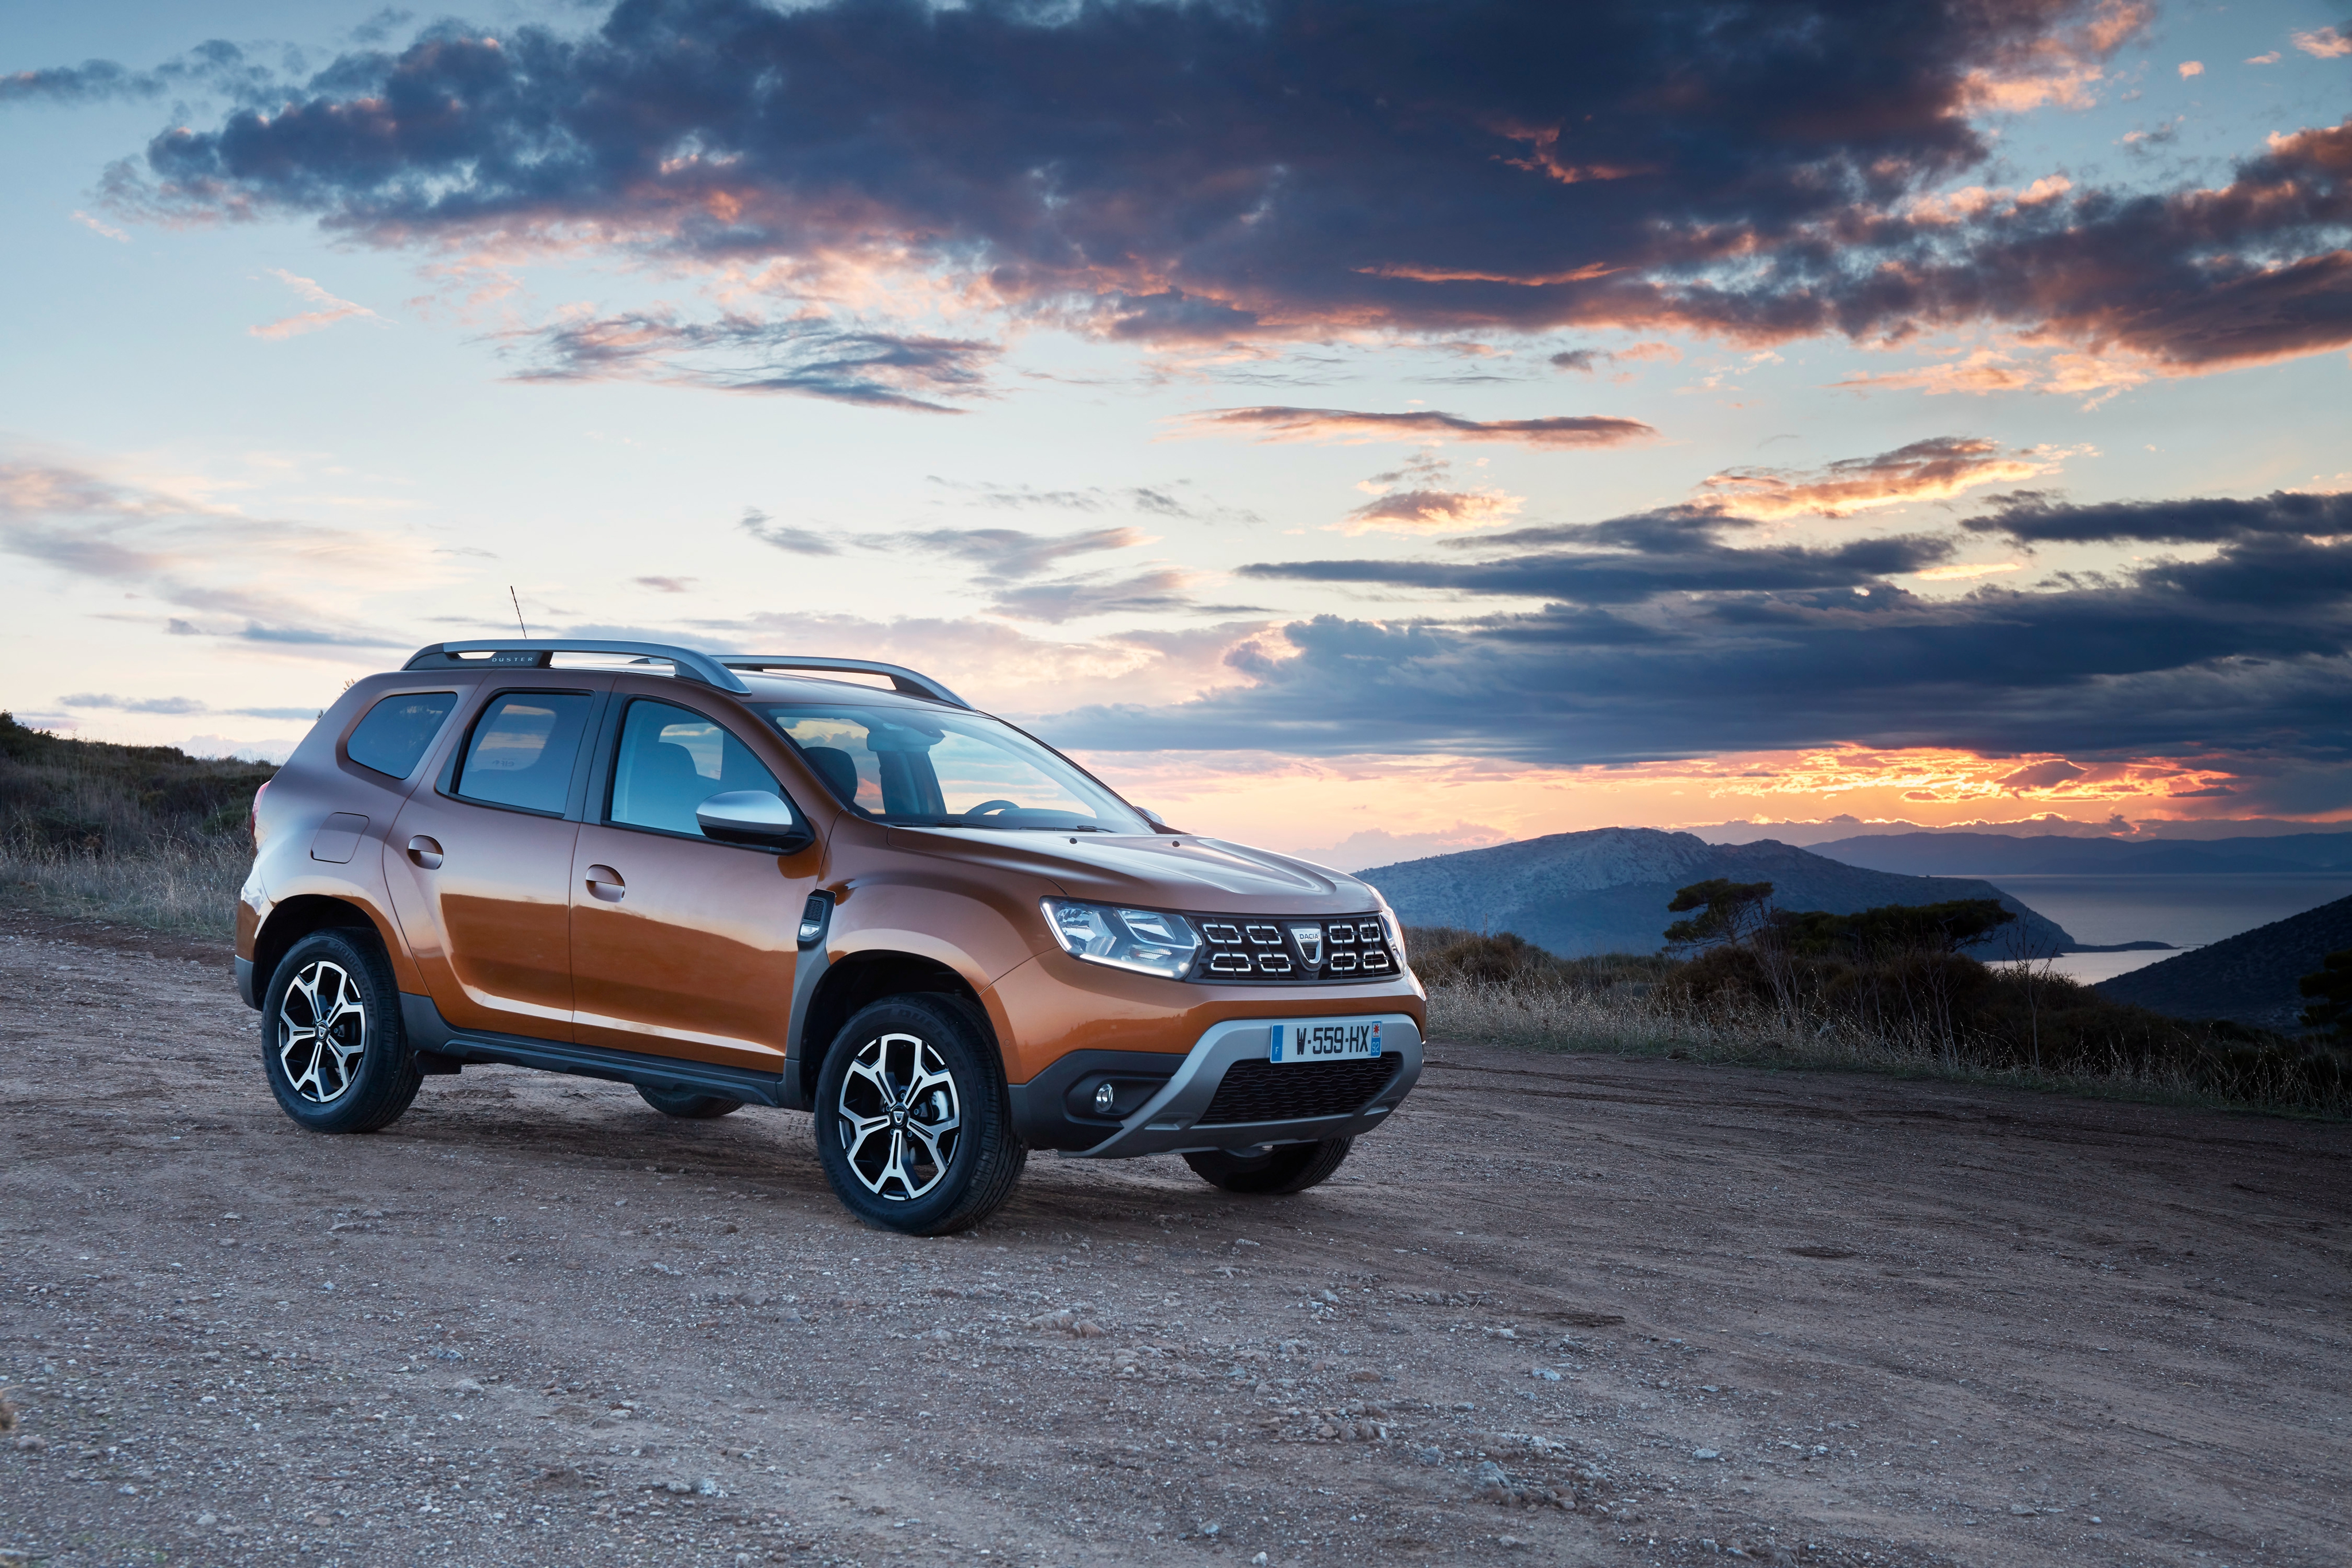 Renault Duster exterior restyling